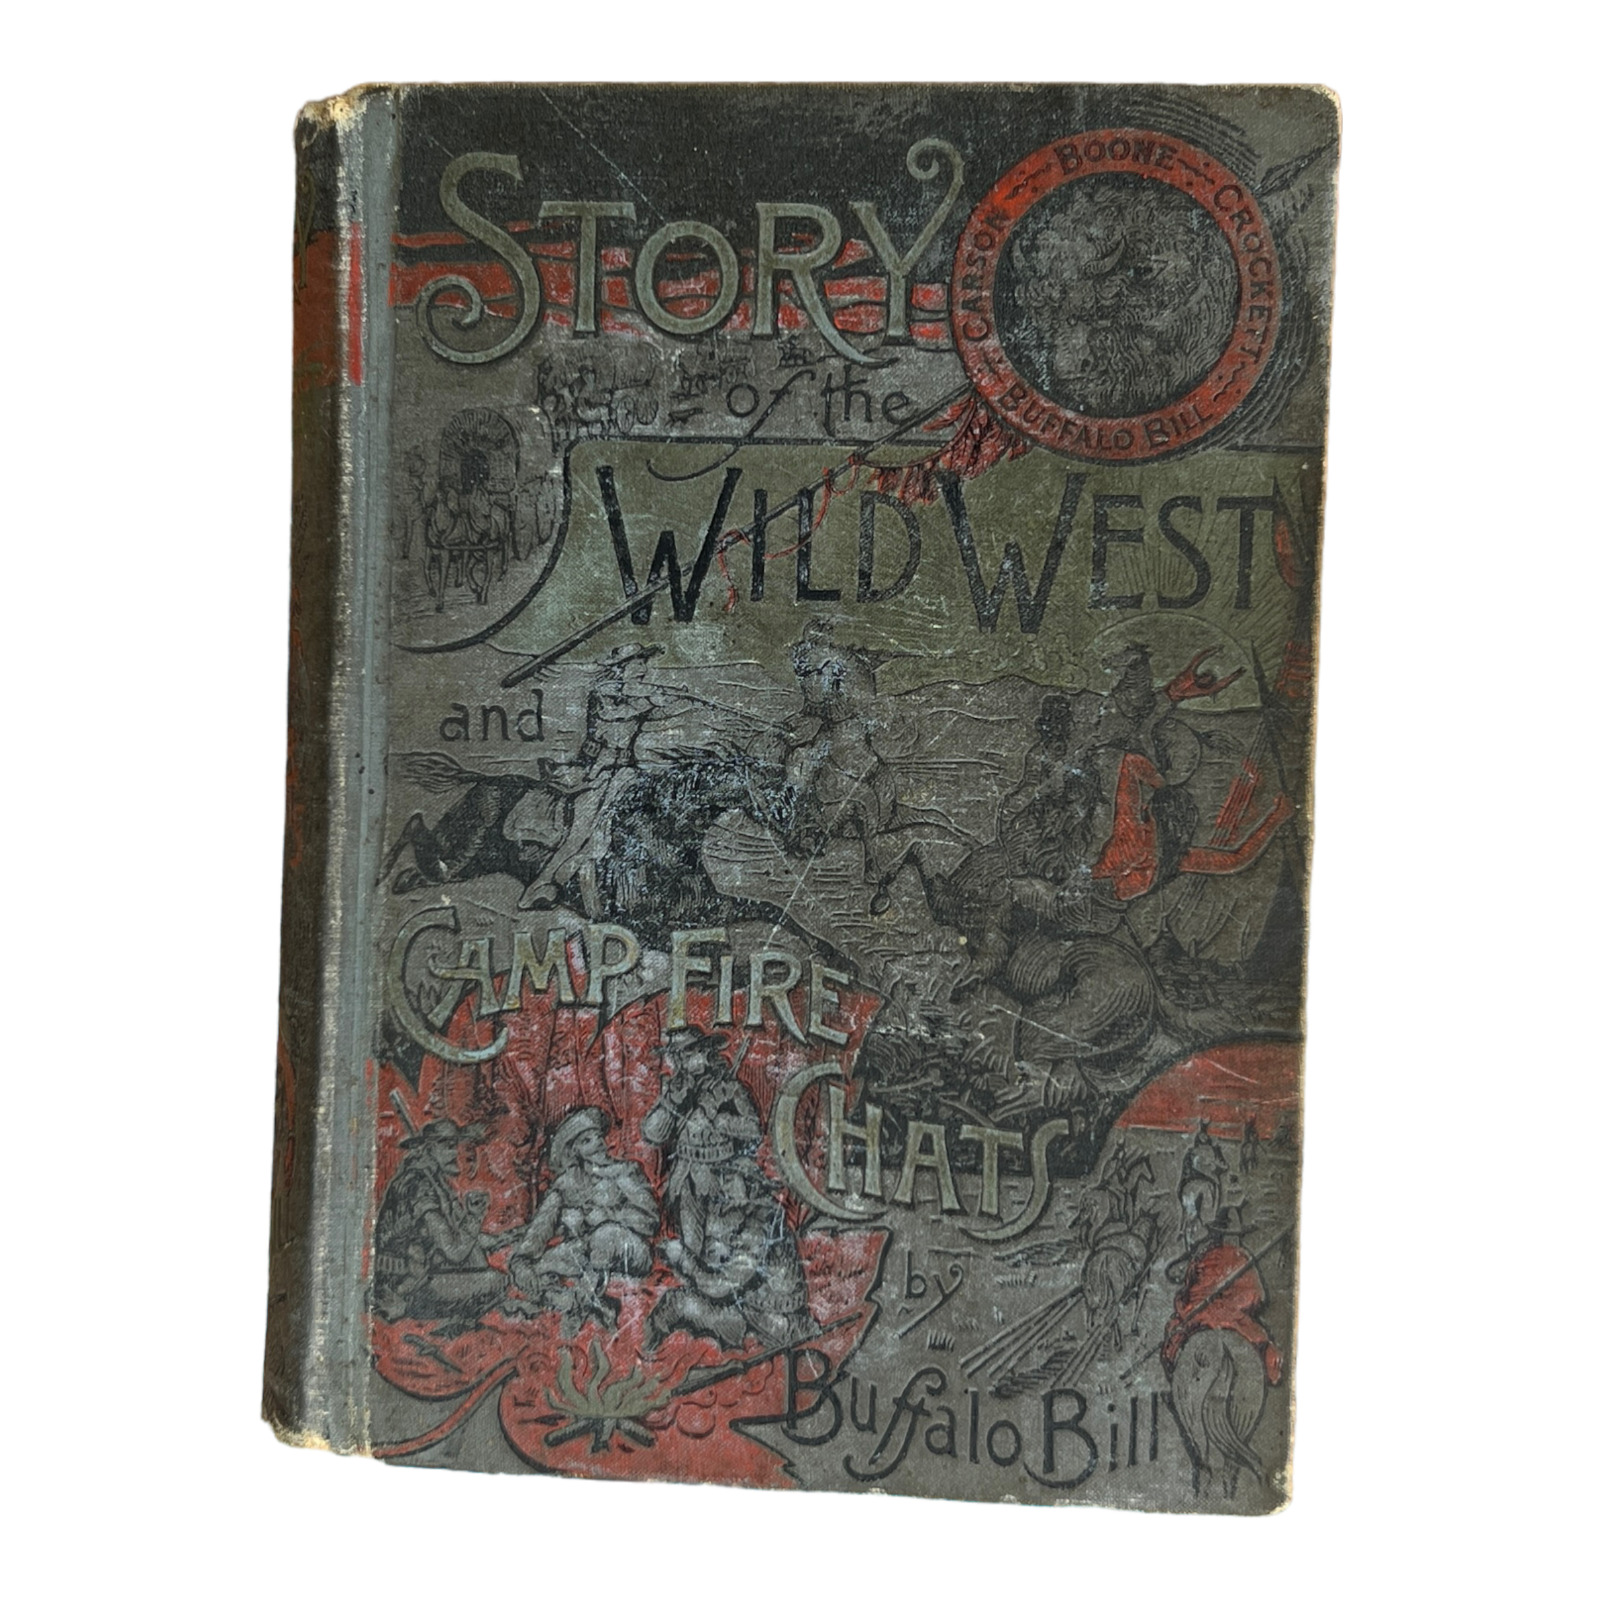 Story of the Wild West and Camp Fire Chats by Buffalo Bill 1889 Hardcover